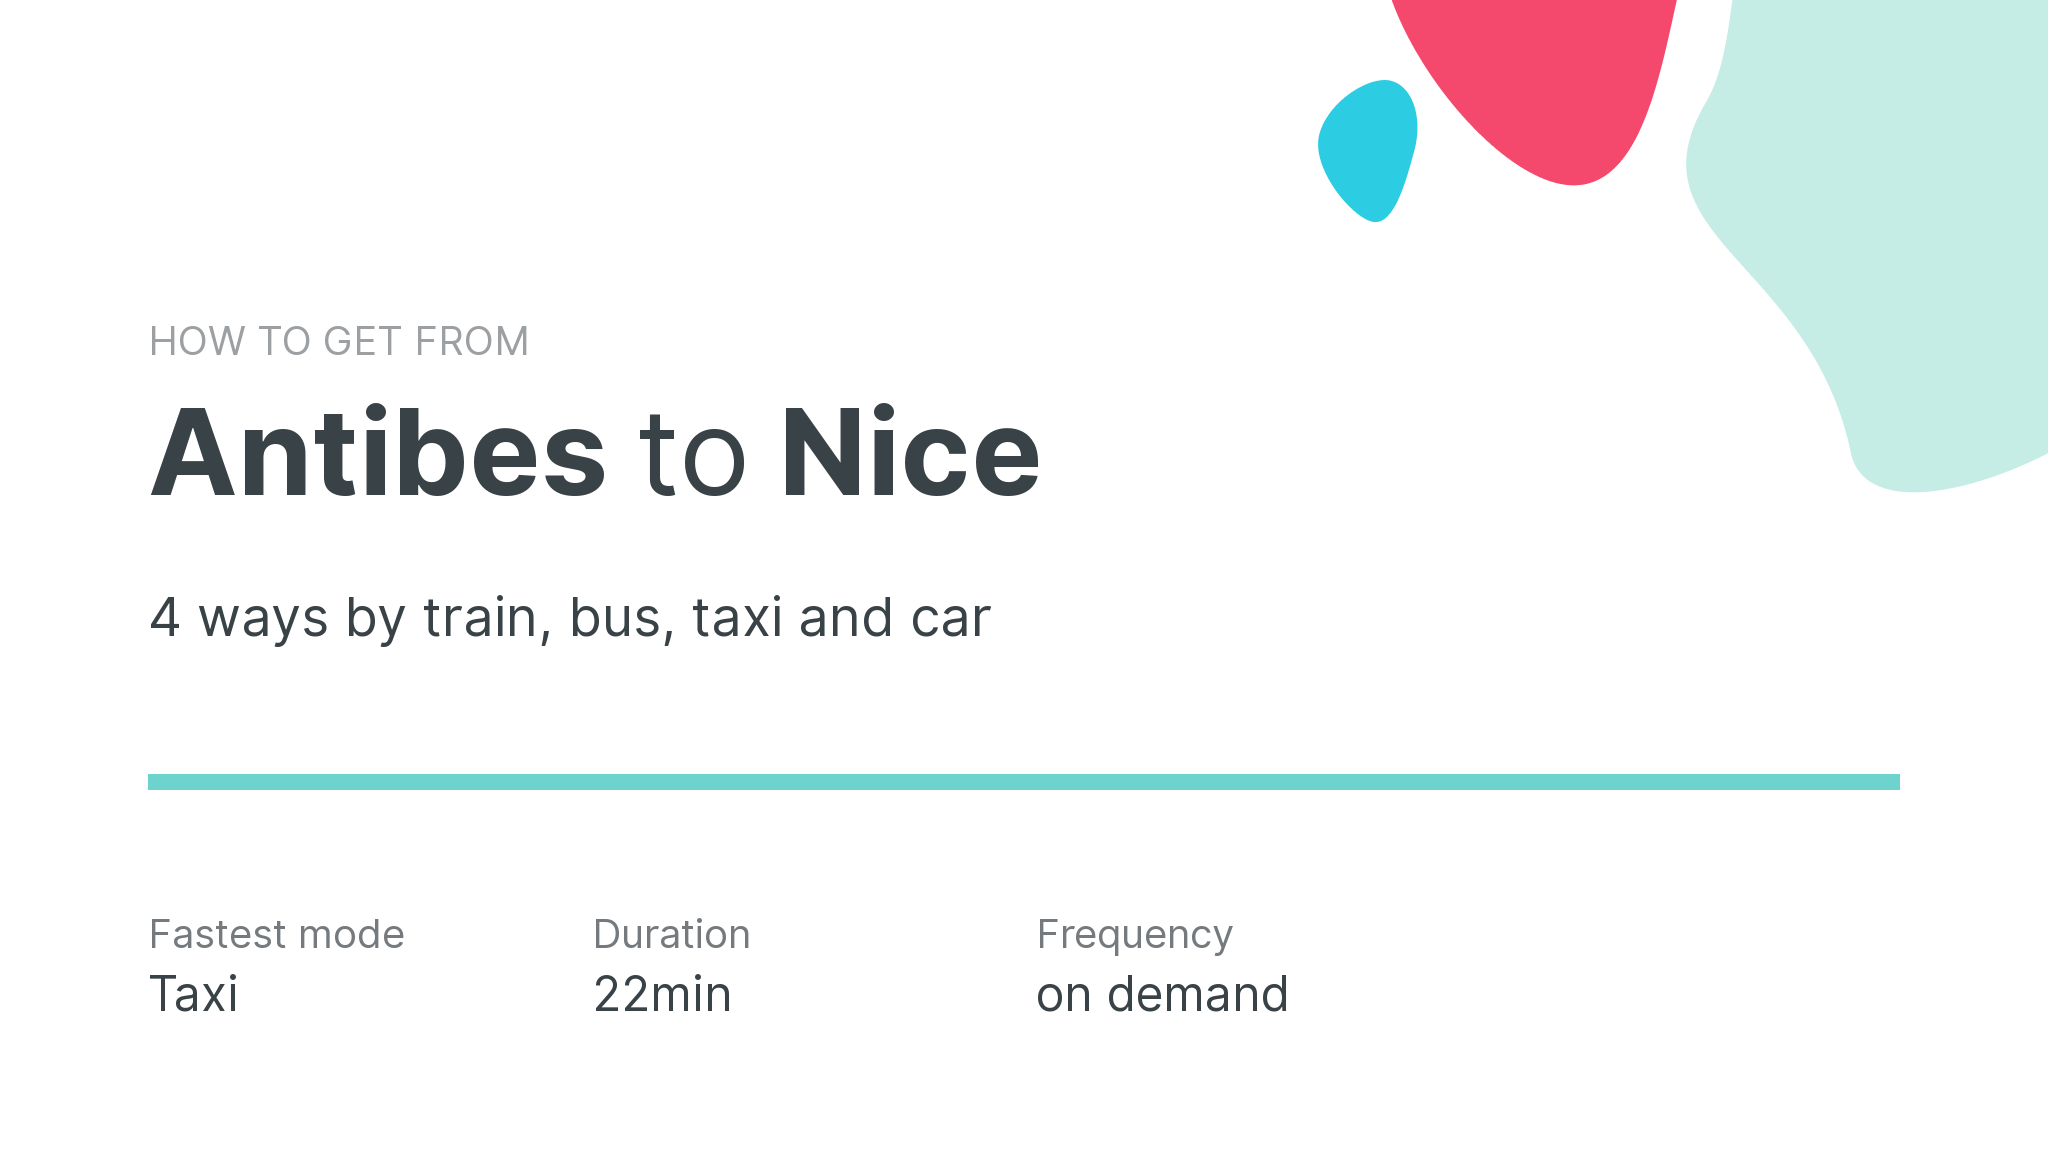 How do I get from Antibes to Nice